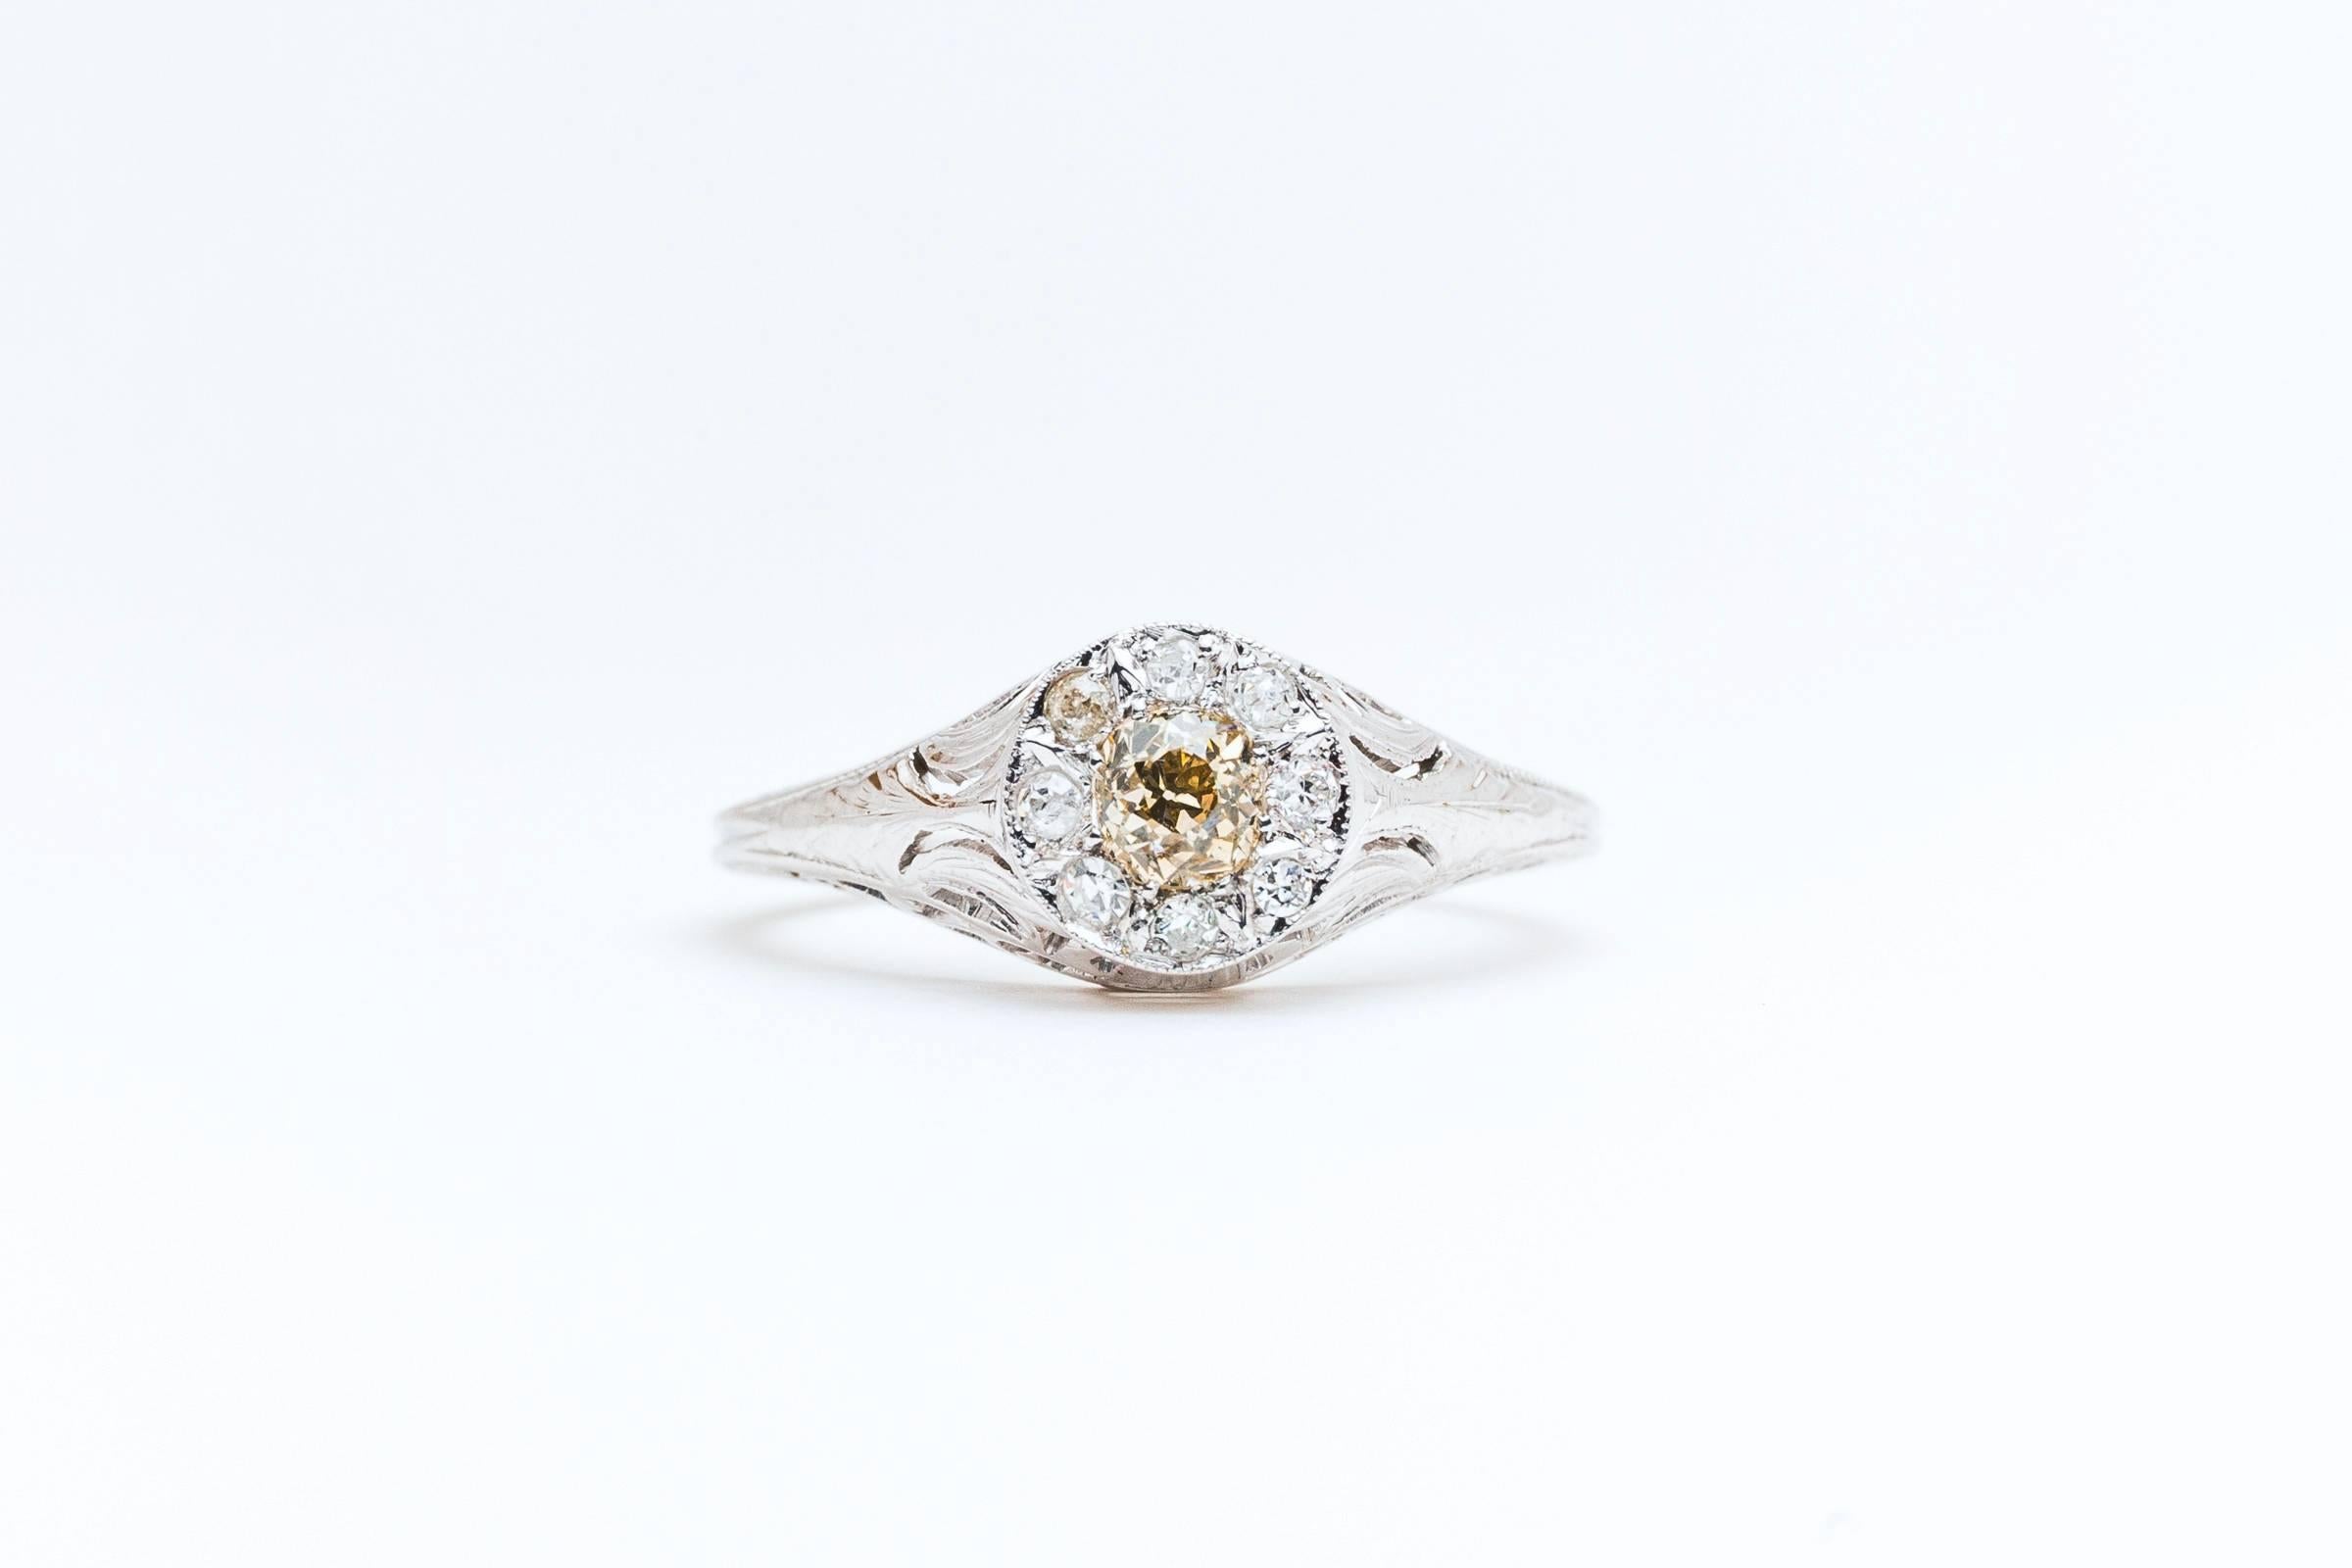 Beacon Hill Jewelers Presents:

An art deco champagne and colorless diamond ring in 18 karat white gold. Centered by a beautiful natural fancy champagne diamond weighing 0.35 carats, this ring features a surrounding halo of eight accenting bright